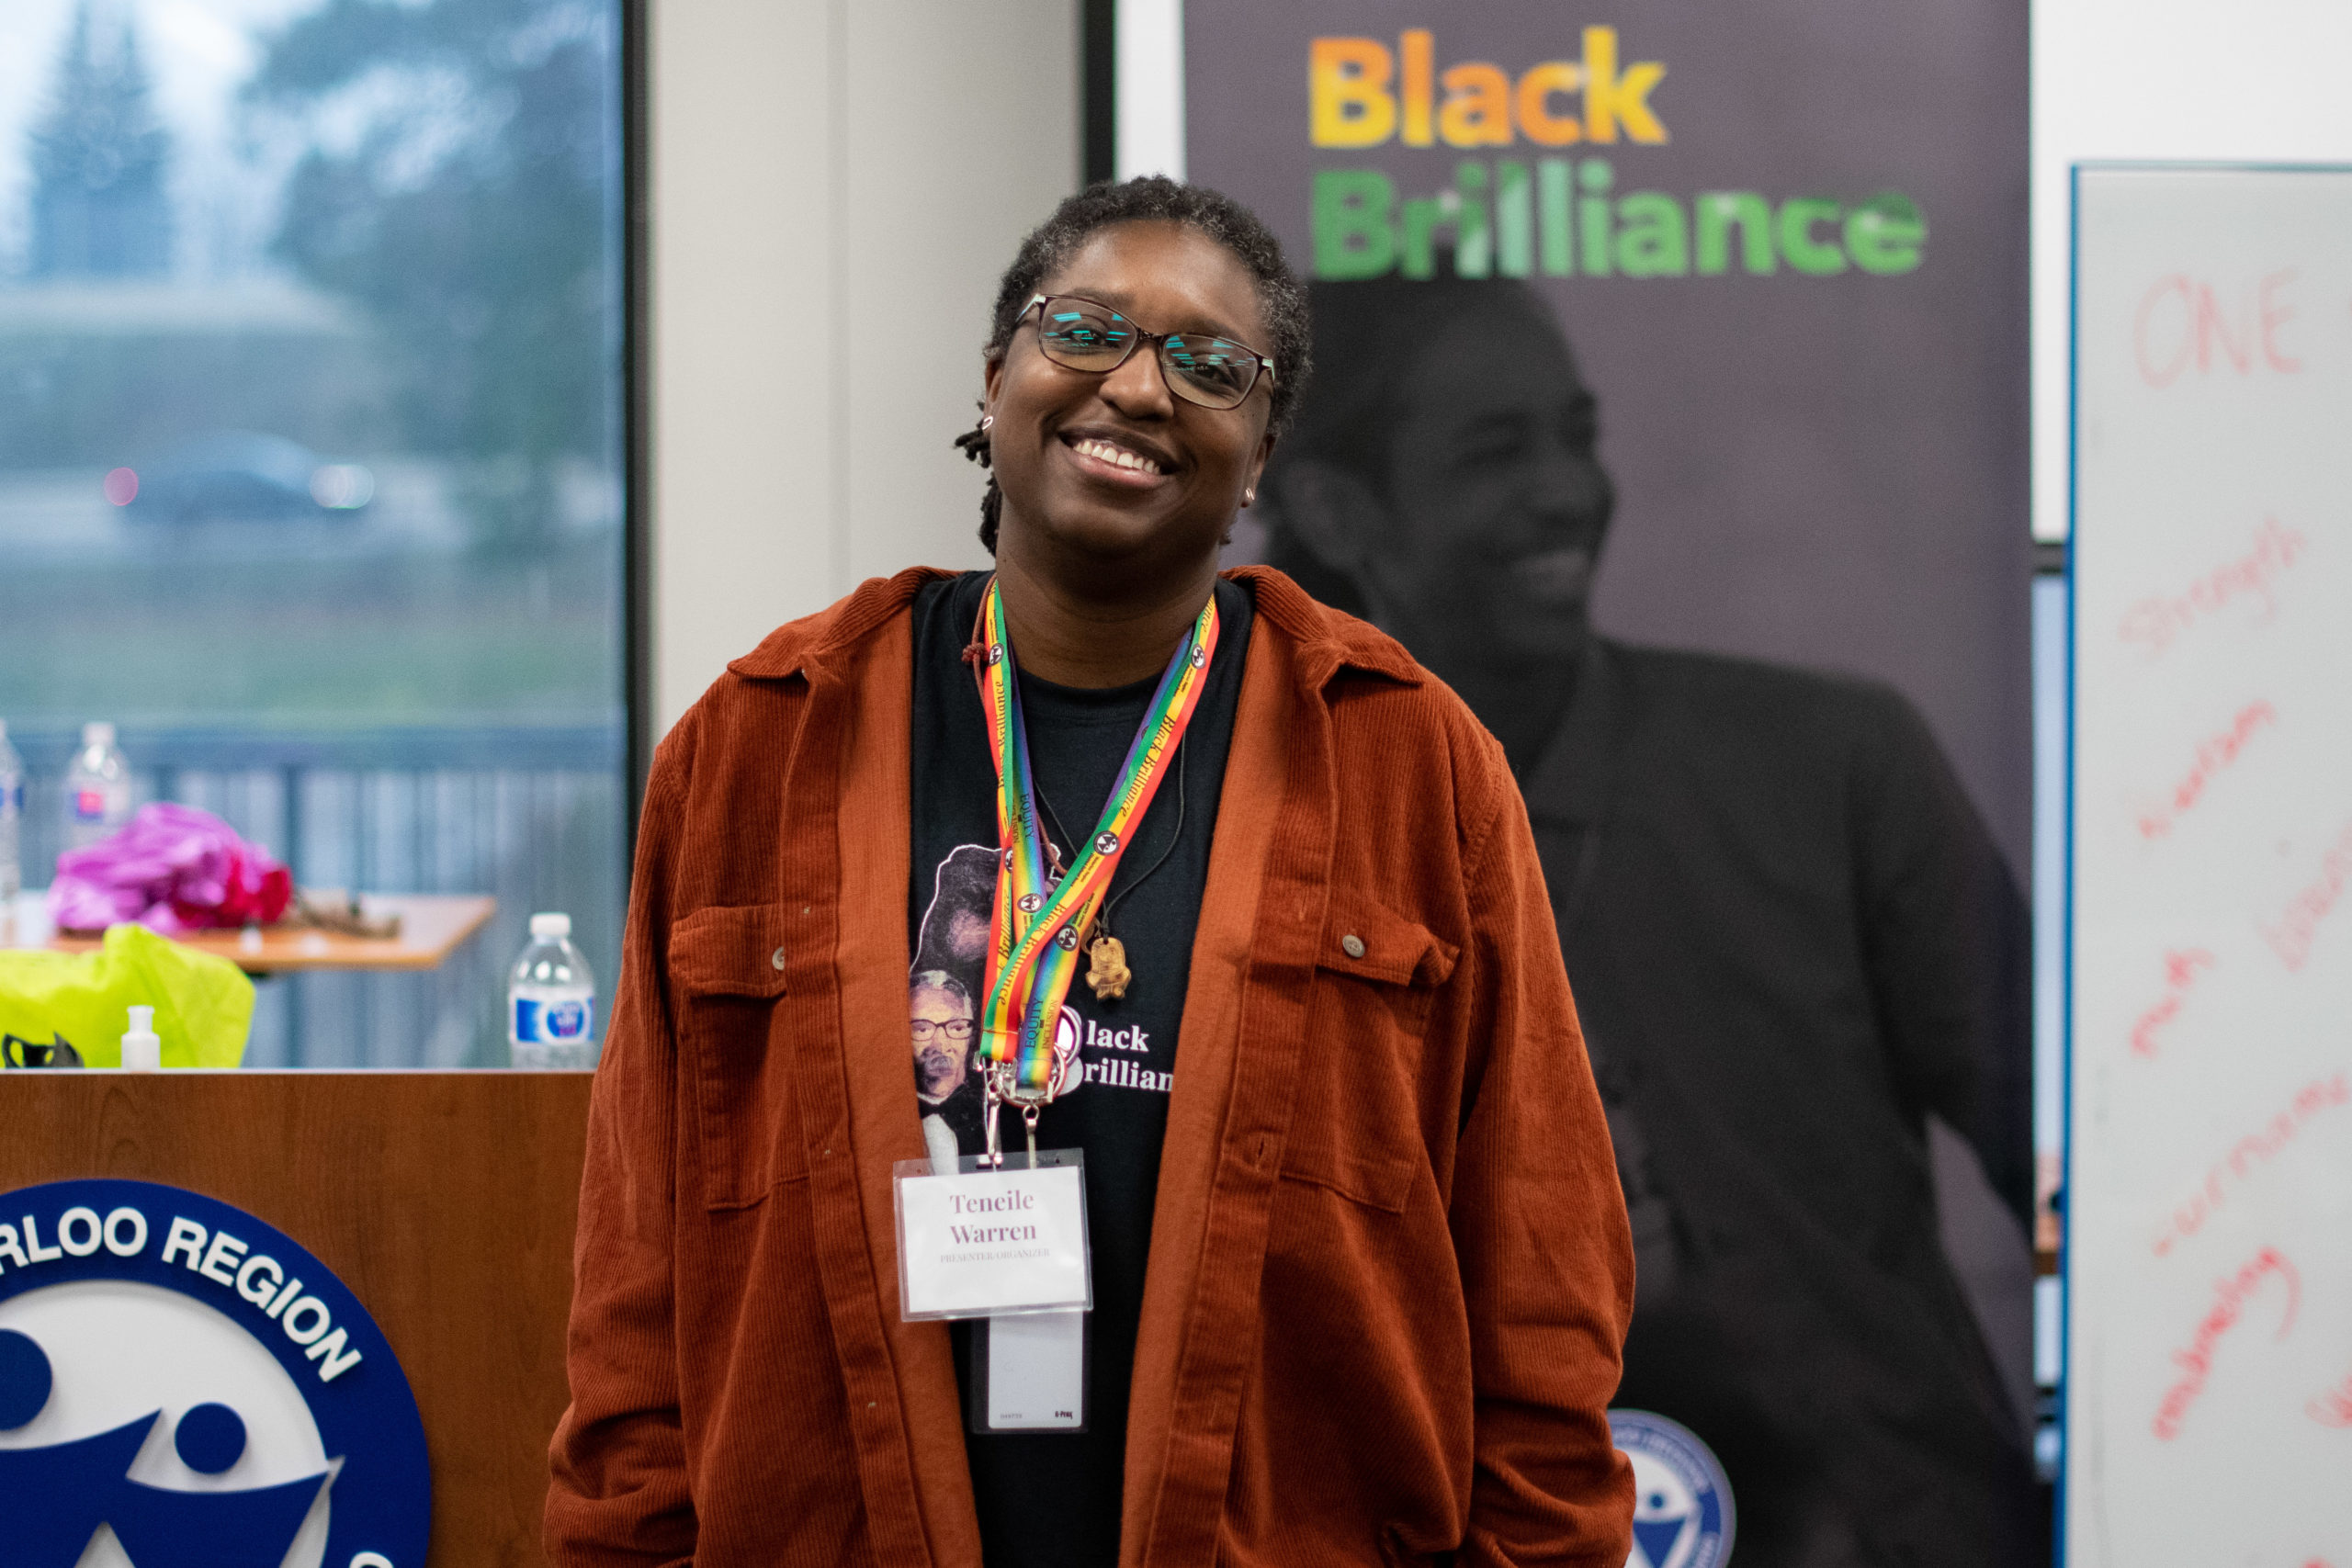 Teneile Warren looks towards the camera and smiles as they stand in front of a banner that reads "Black Brilliance". 